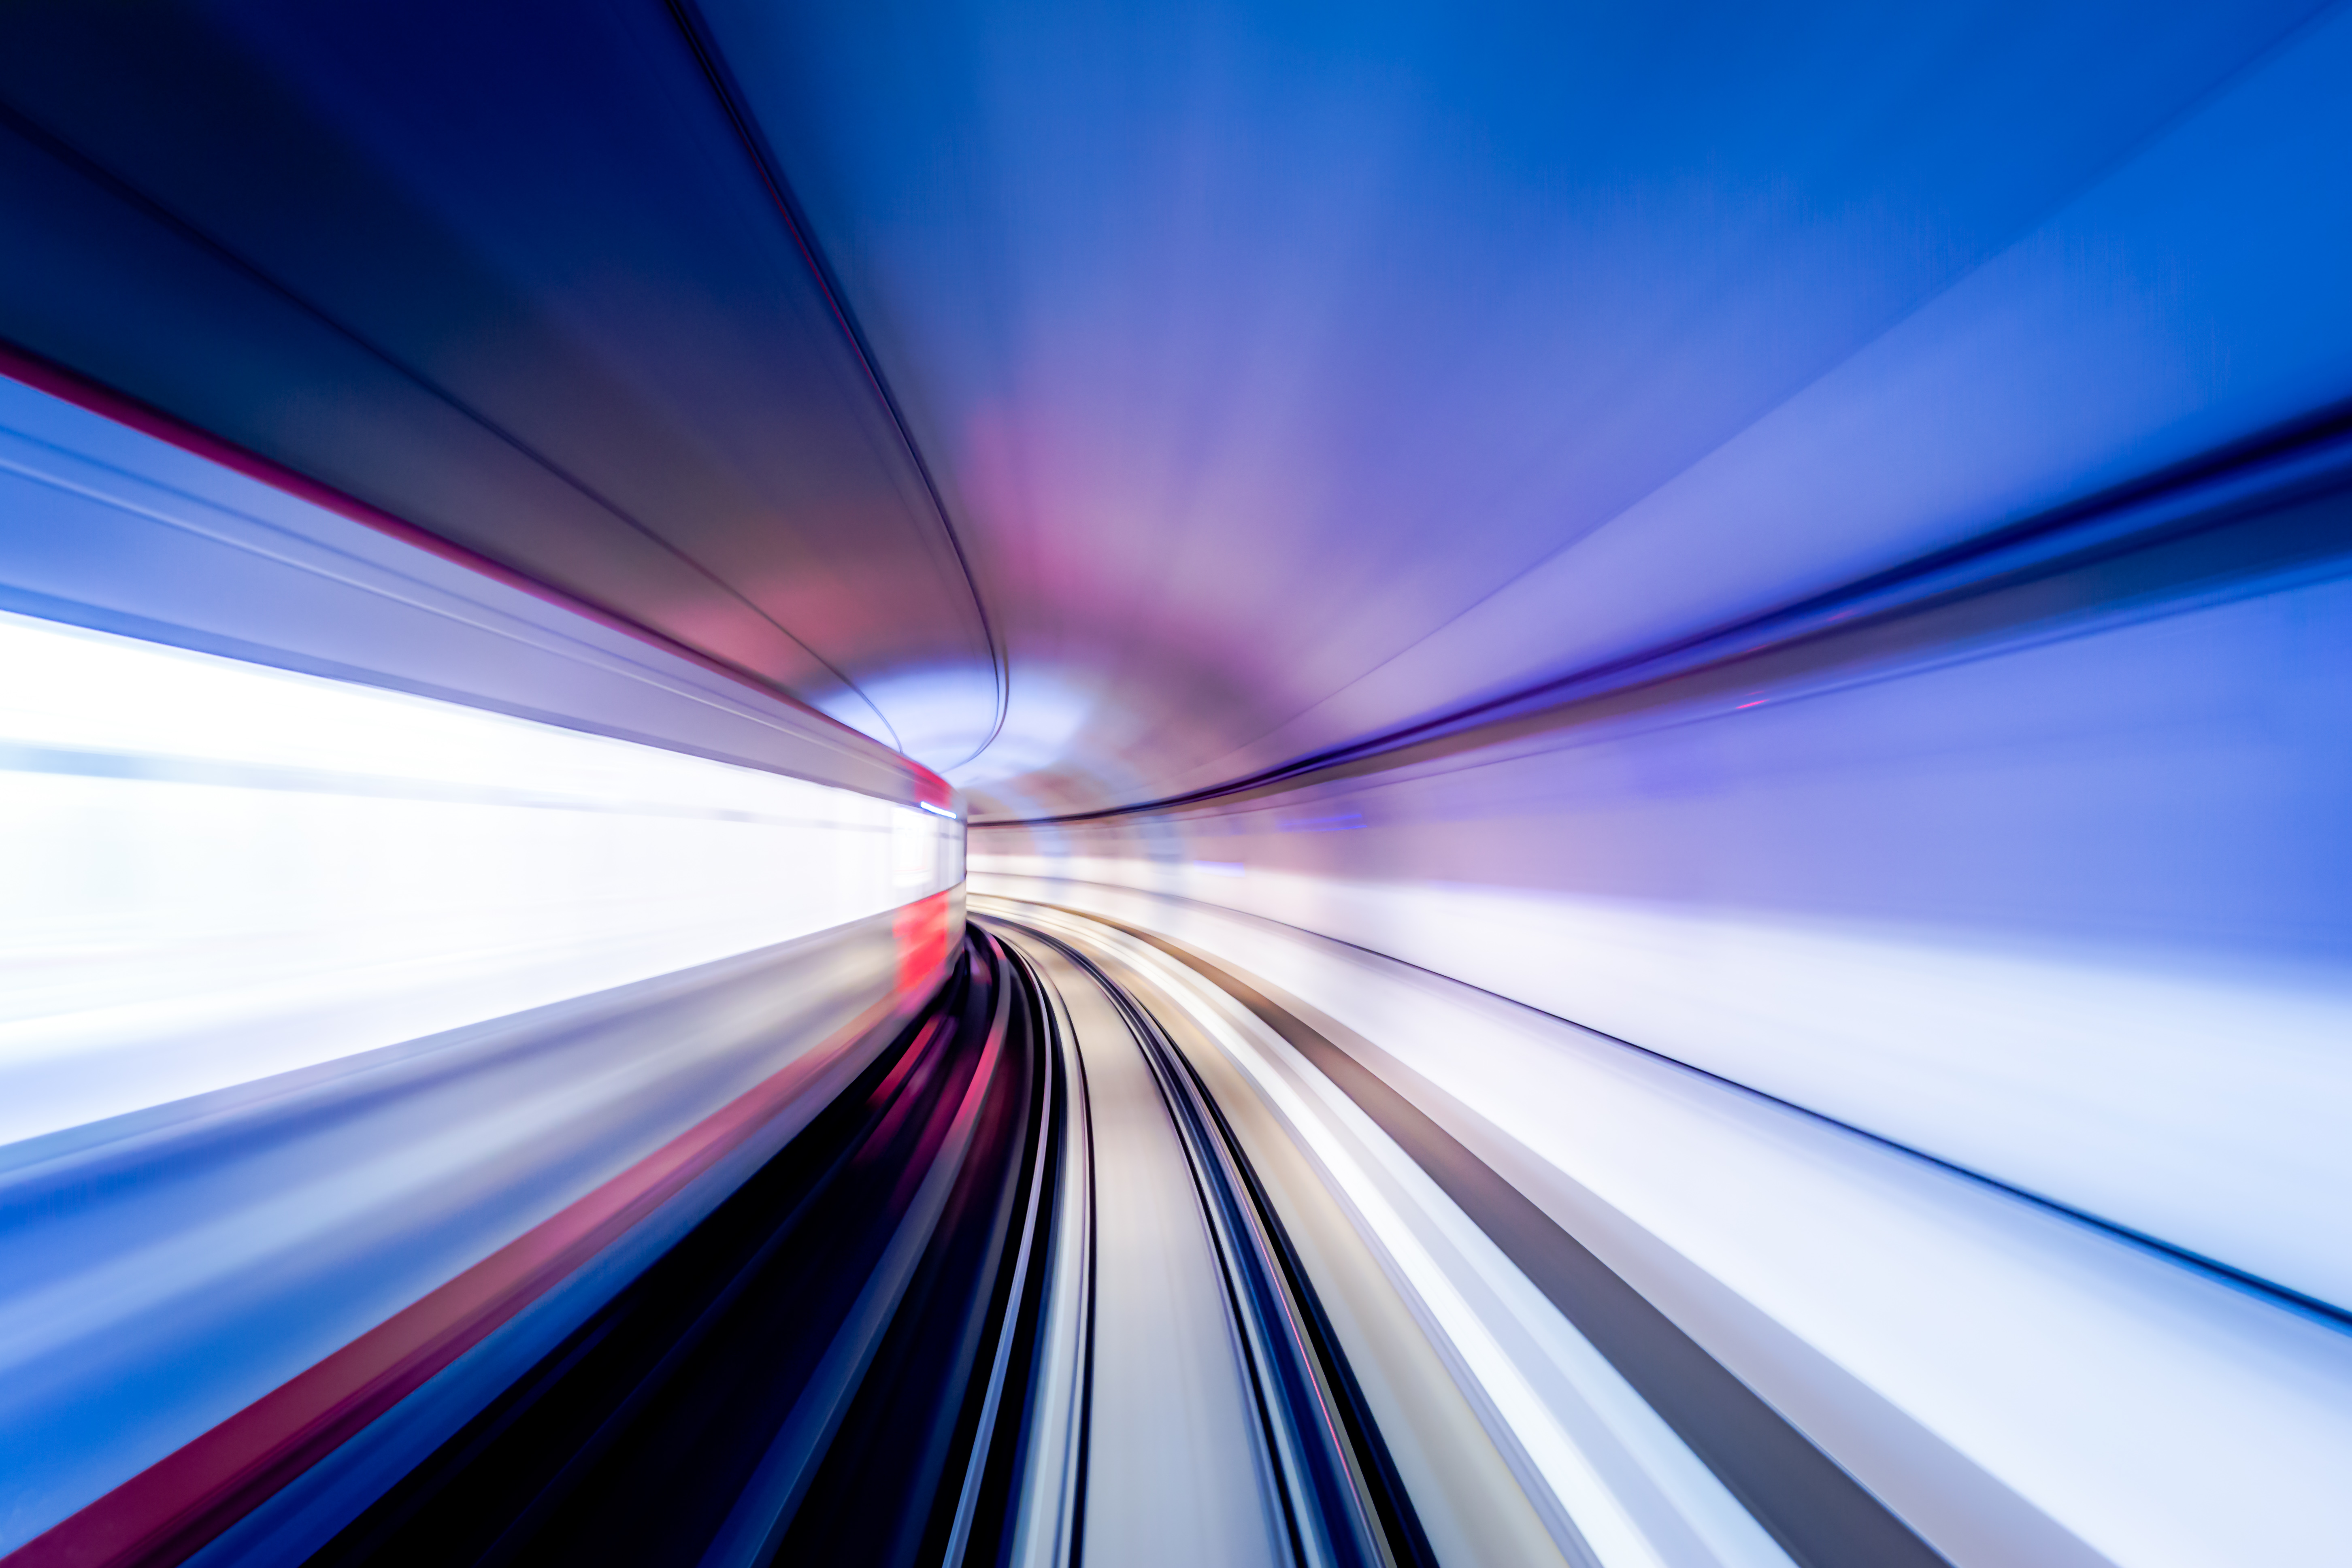 tunnel, miscellanea, miscellaneous, turn, blur, smooth, speed Image for desktop